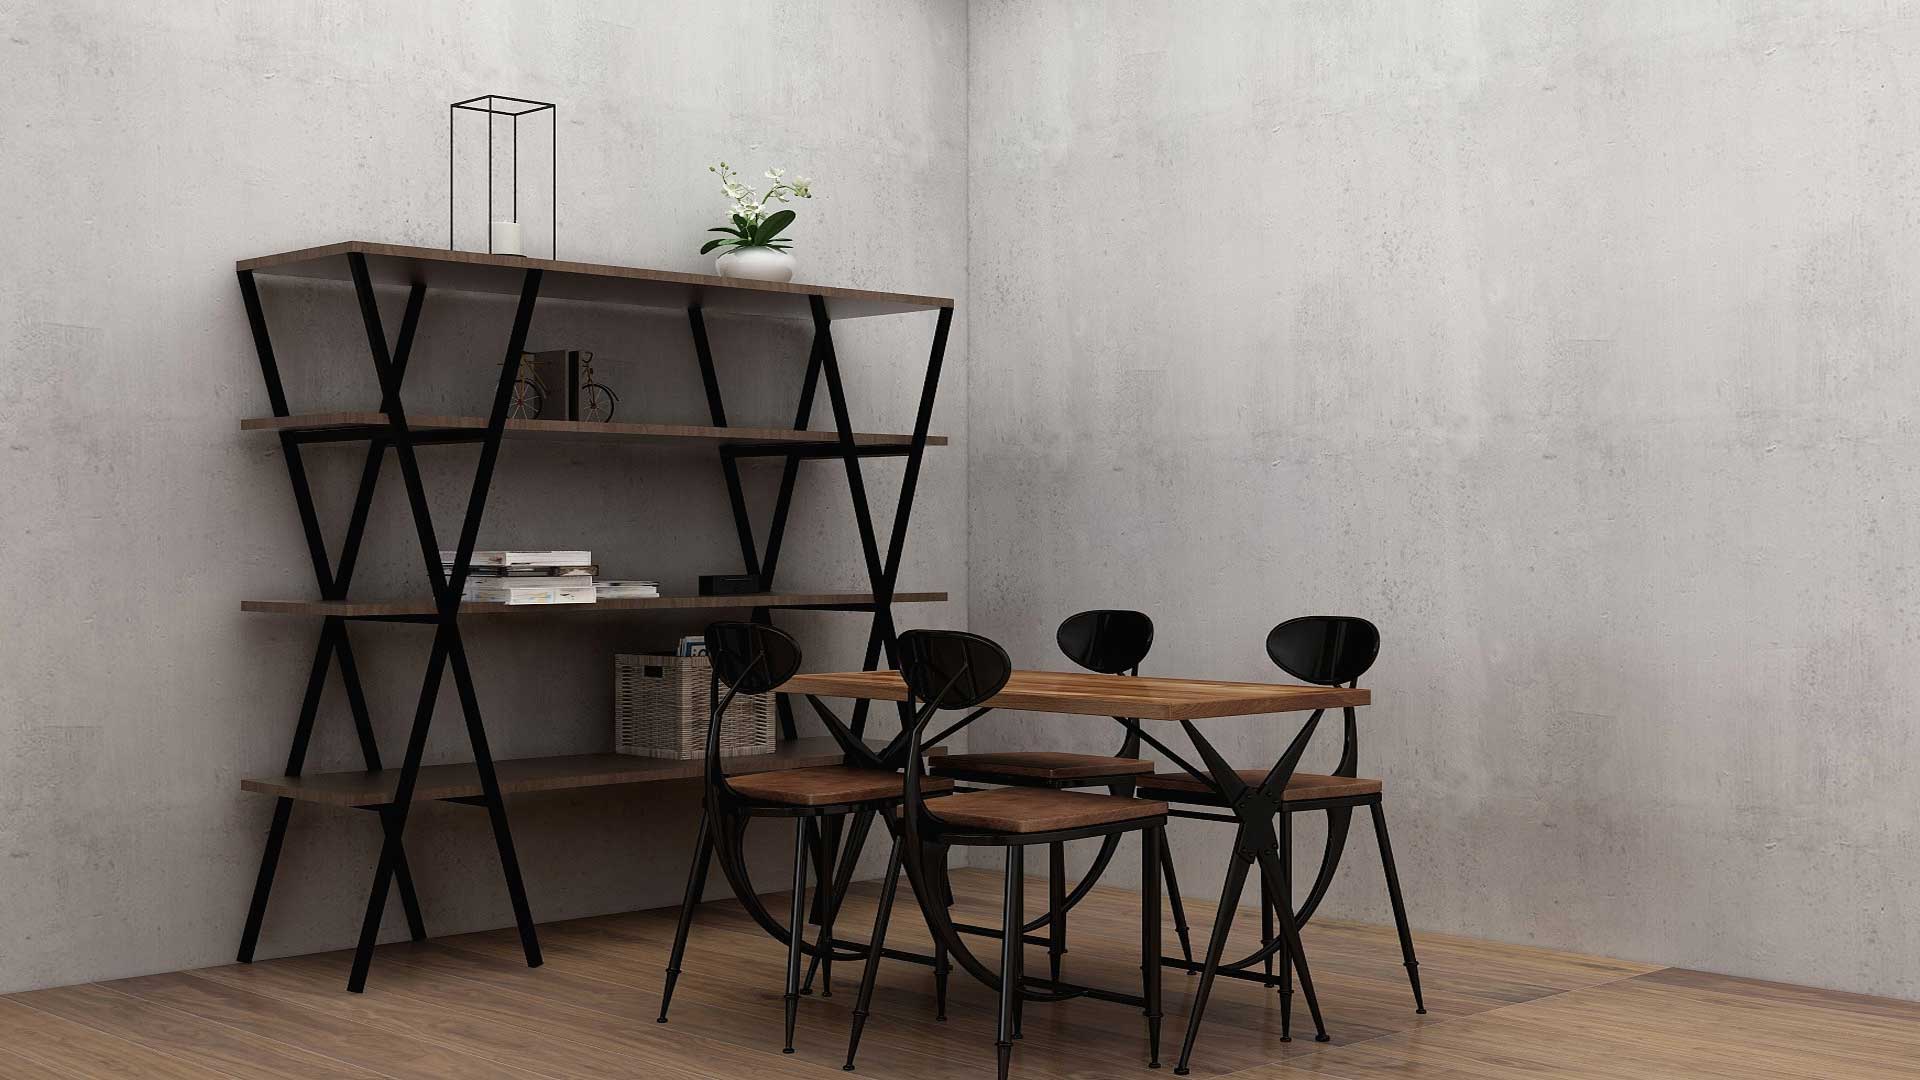 Industrial functional furniture using wood and metal materials